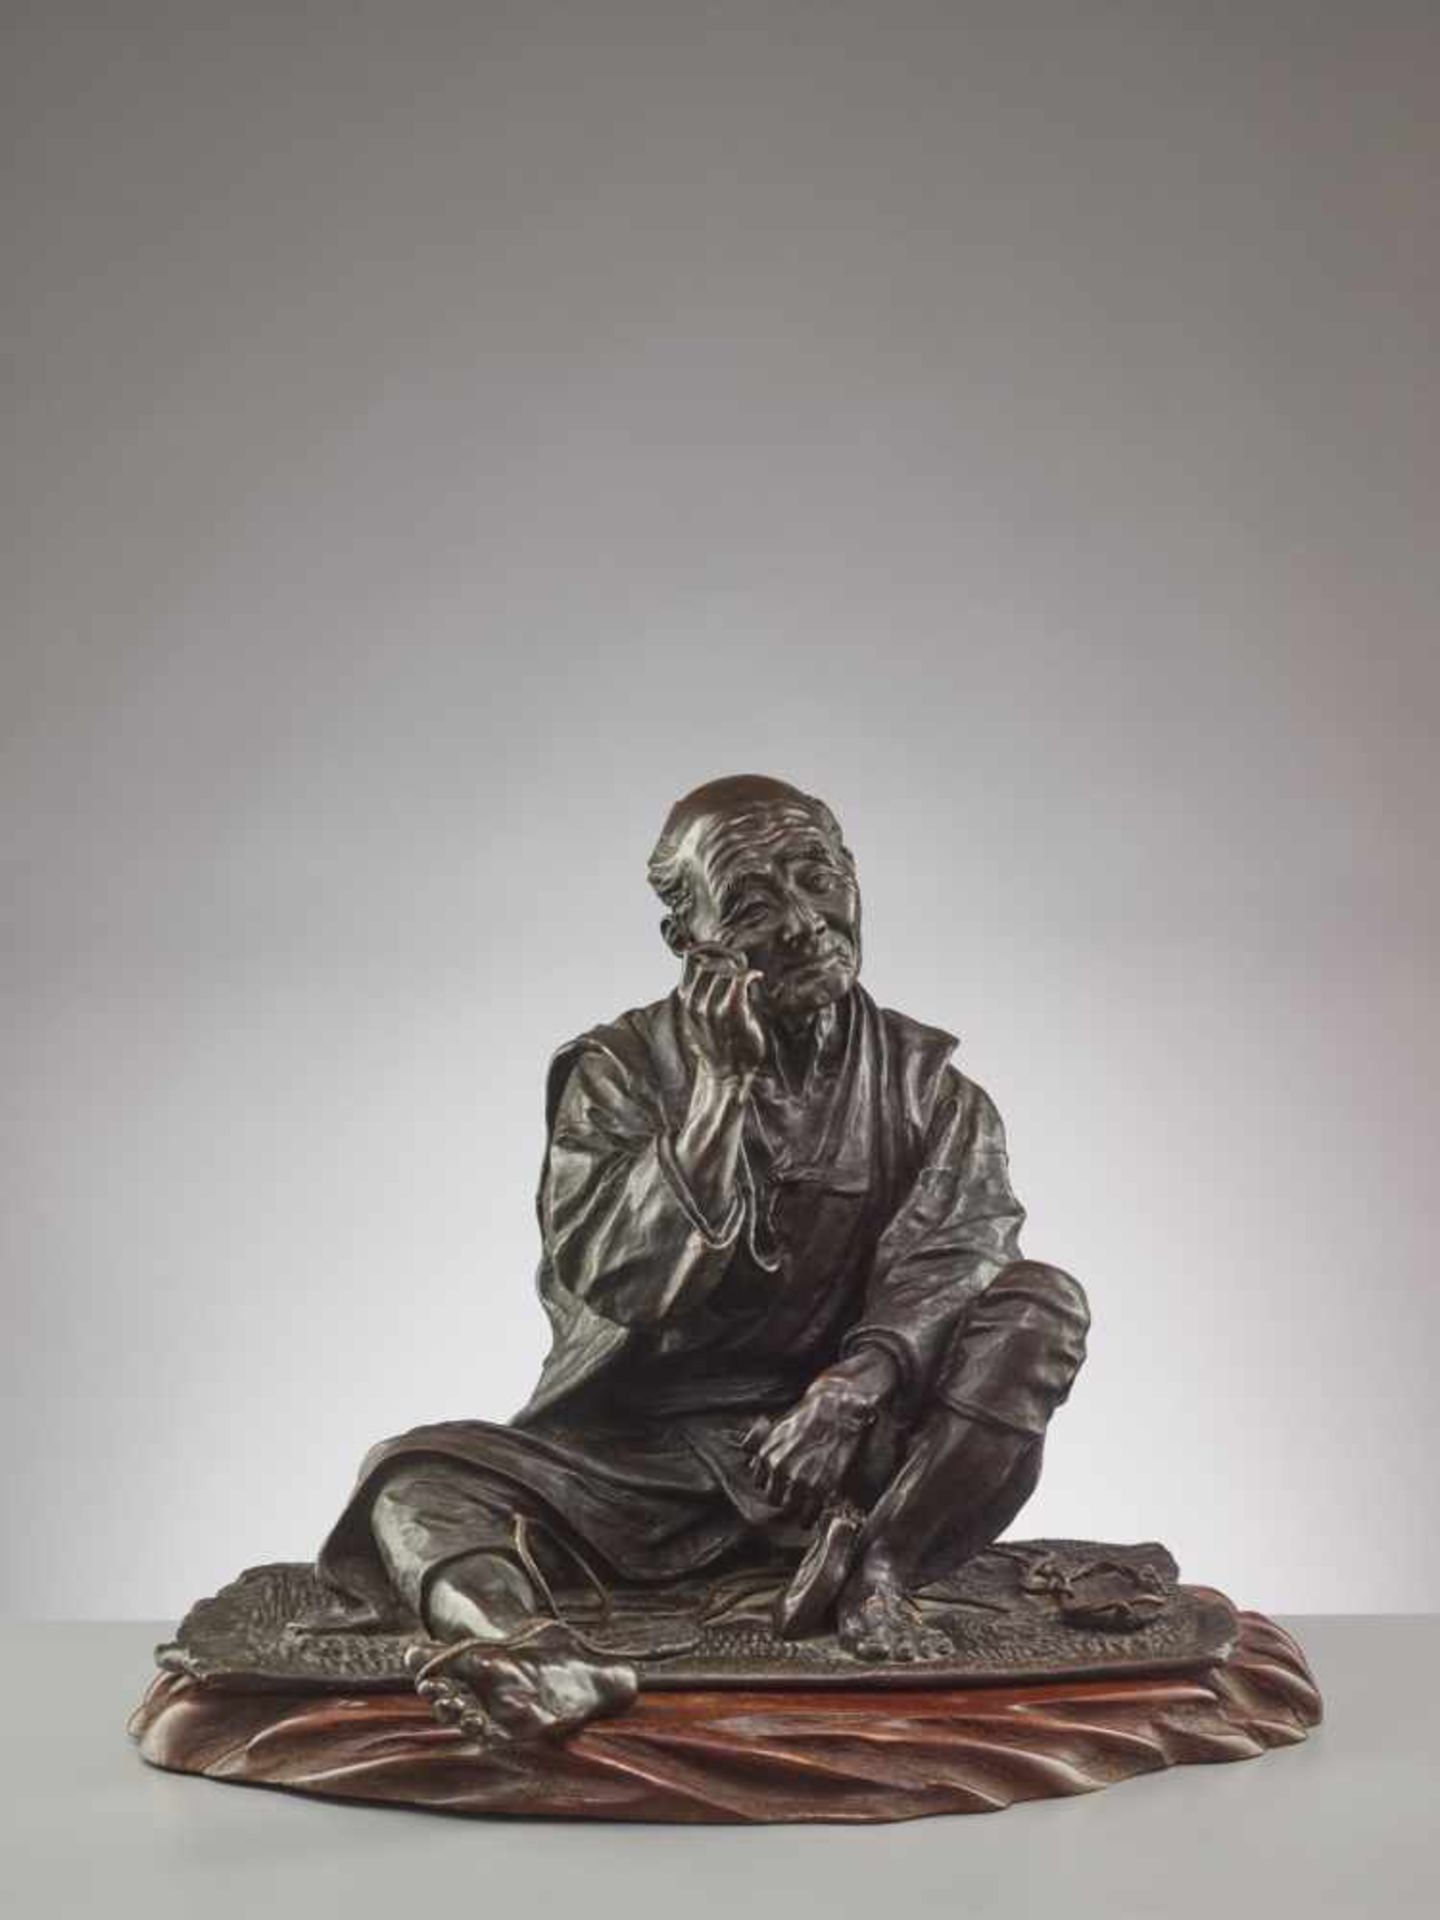 A FINE AND LARGE JAPANESE BRONZE OF A ZORI SANDAL MAKER TAKING A SMOKING BREAK BY TAKAHASHI RYOUN - Image 6 of 11